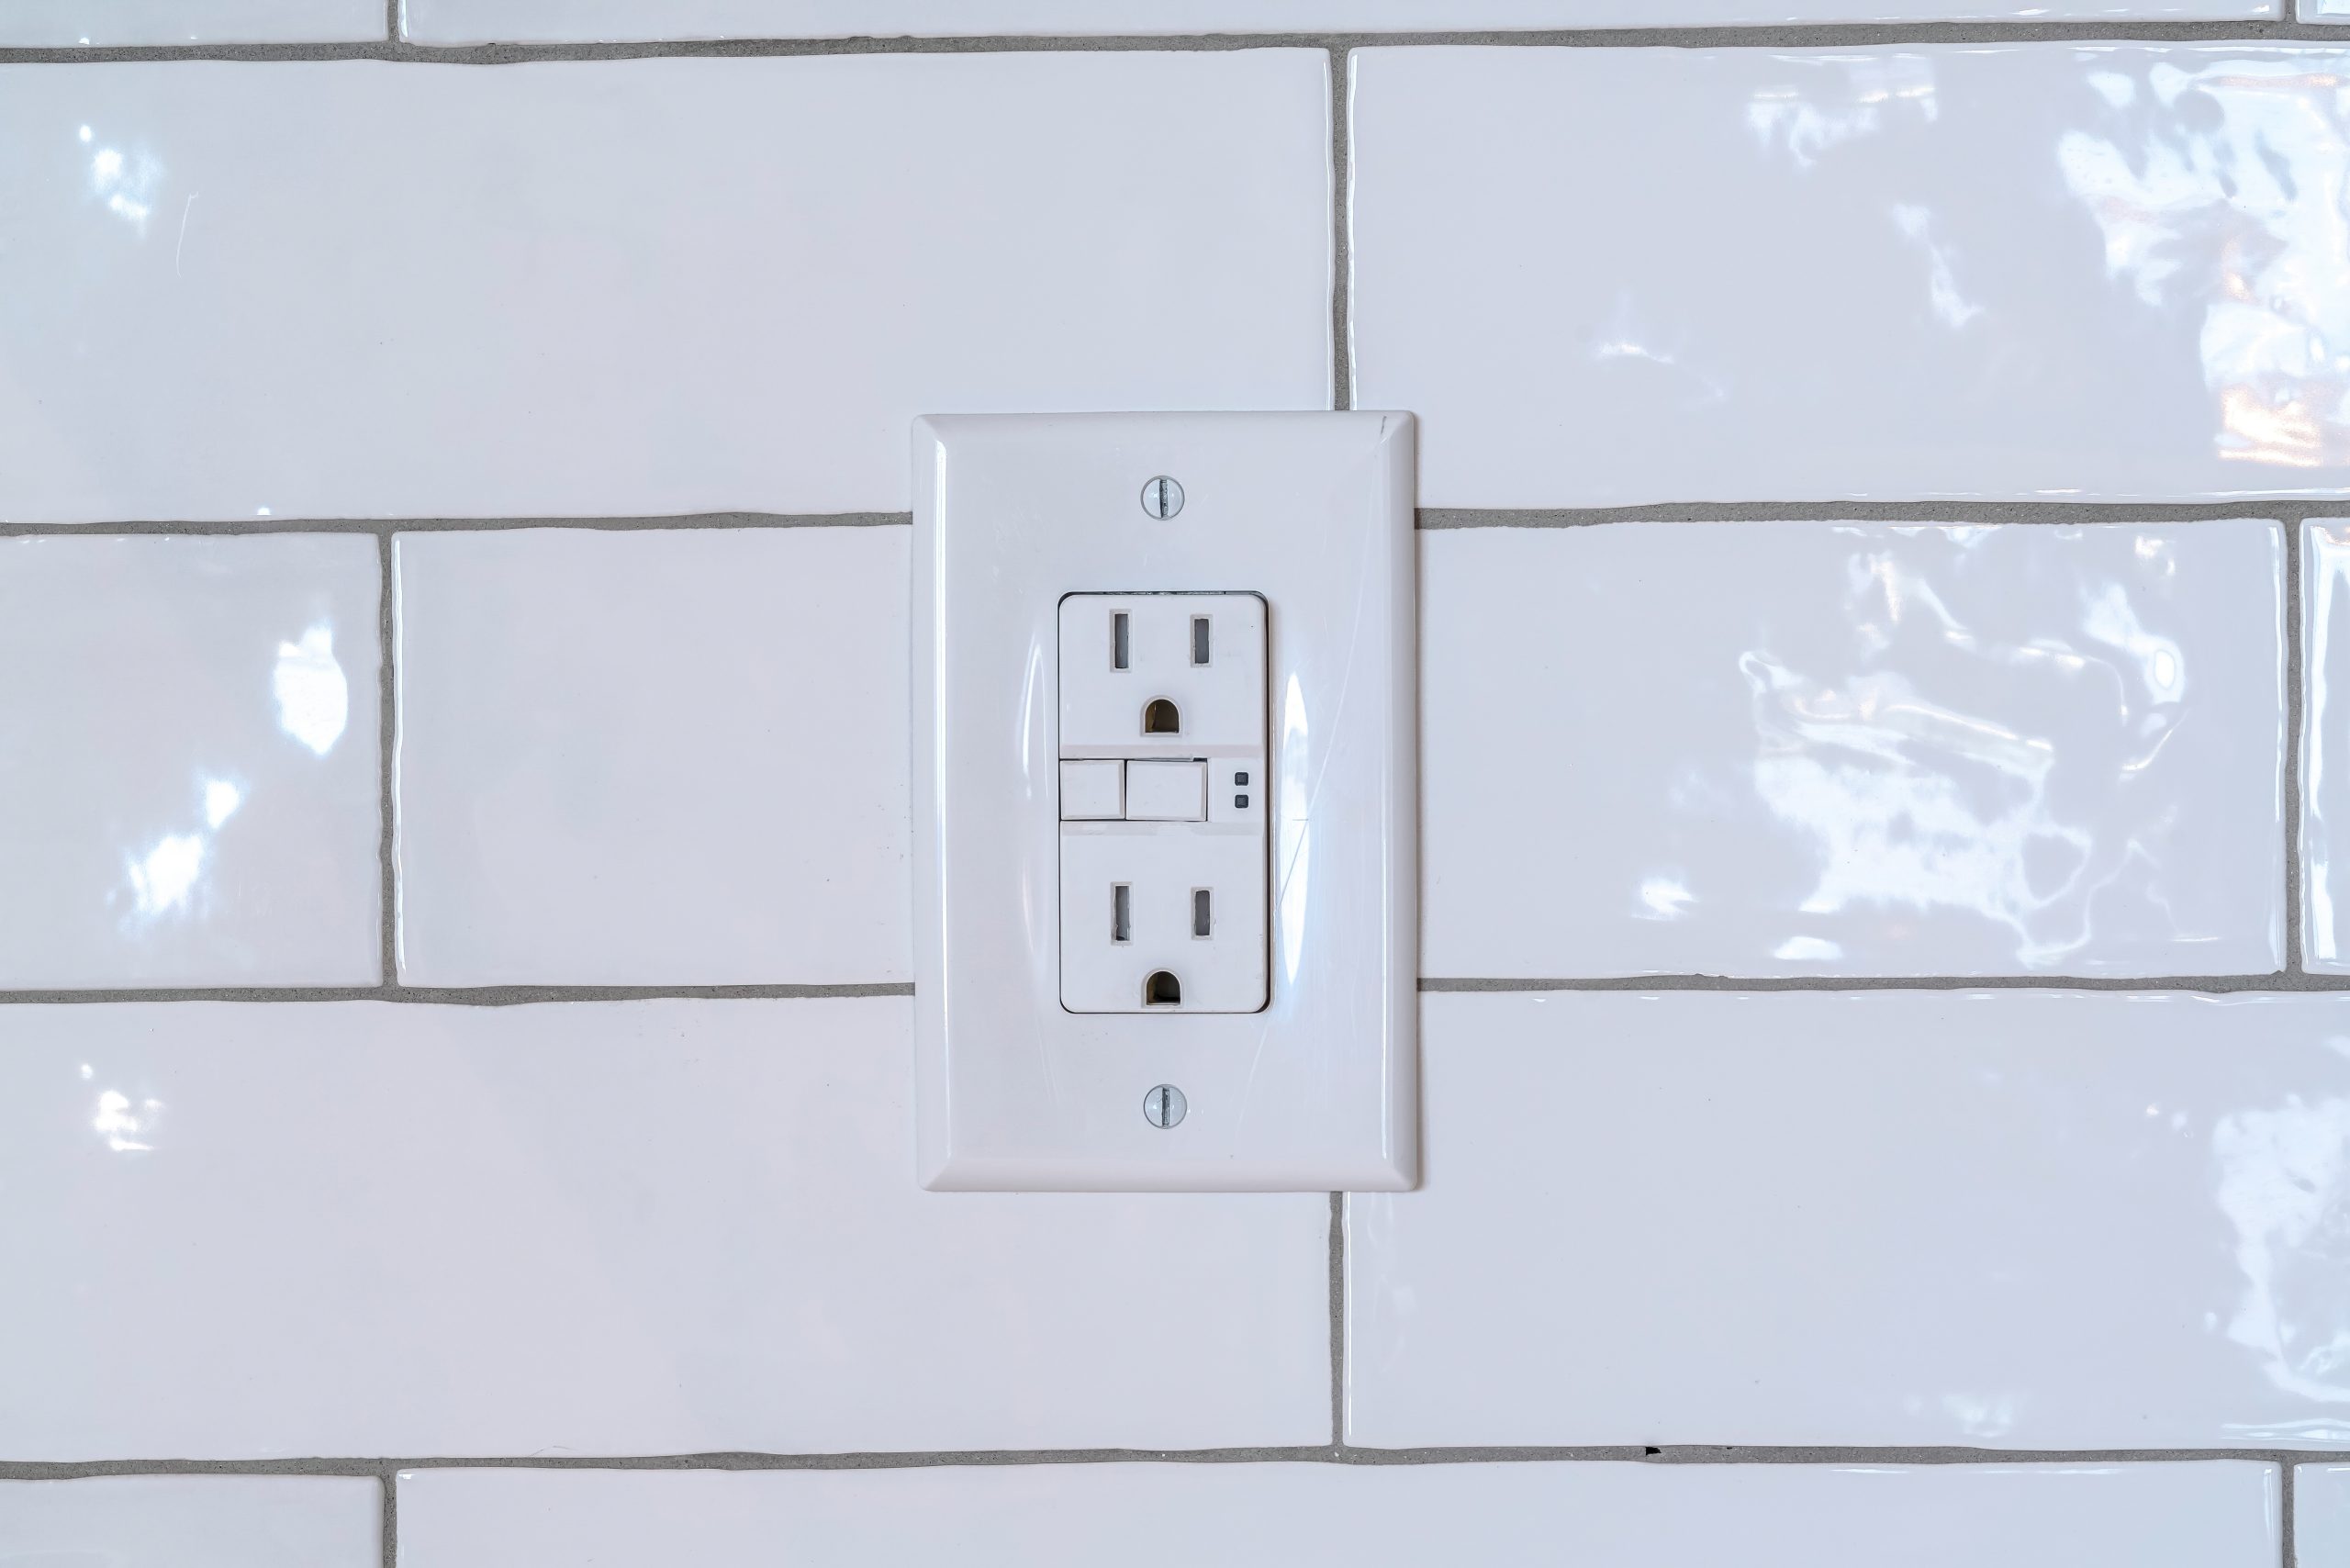 Three slot grounded receptacle for appliances against white tile wall of home. Close up of the electricity outlet fixture inside a house.